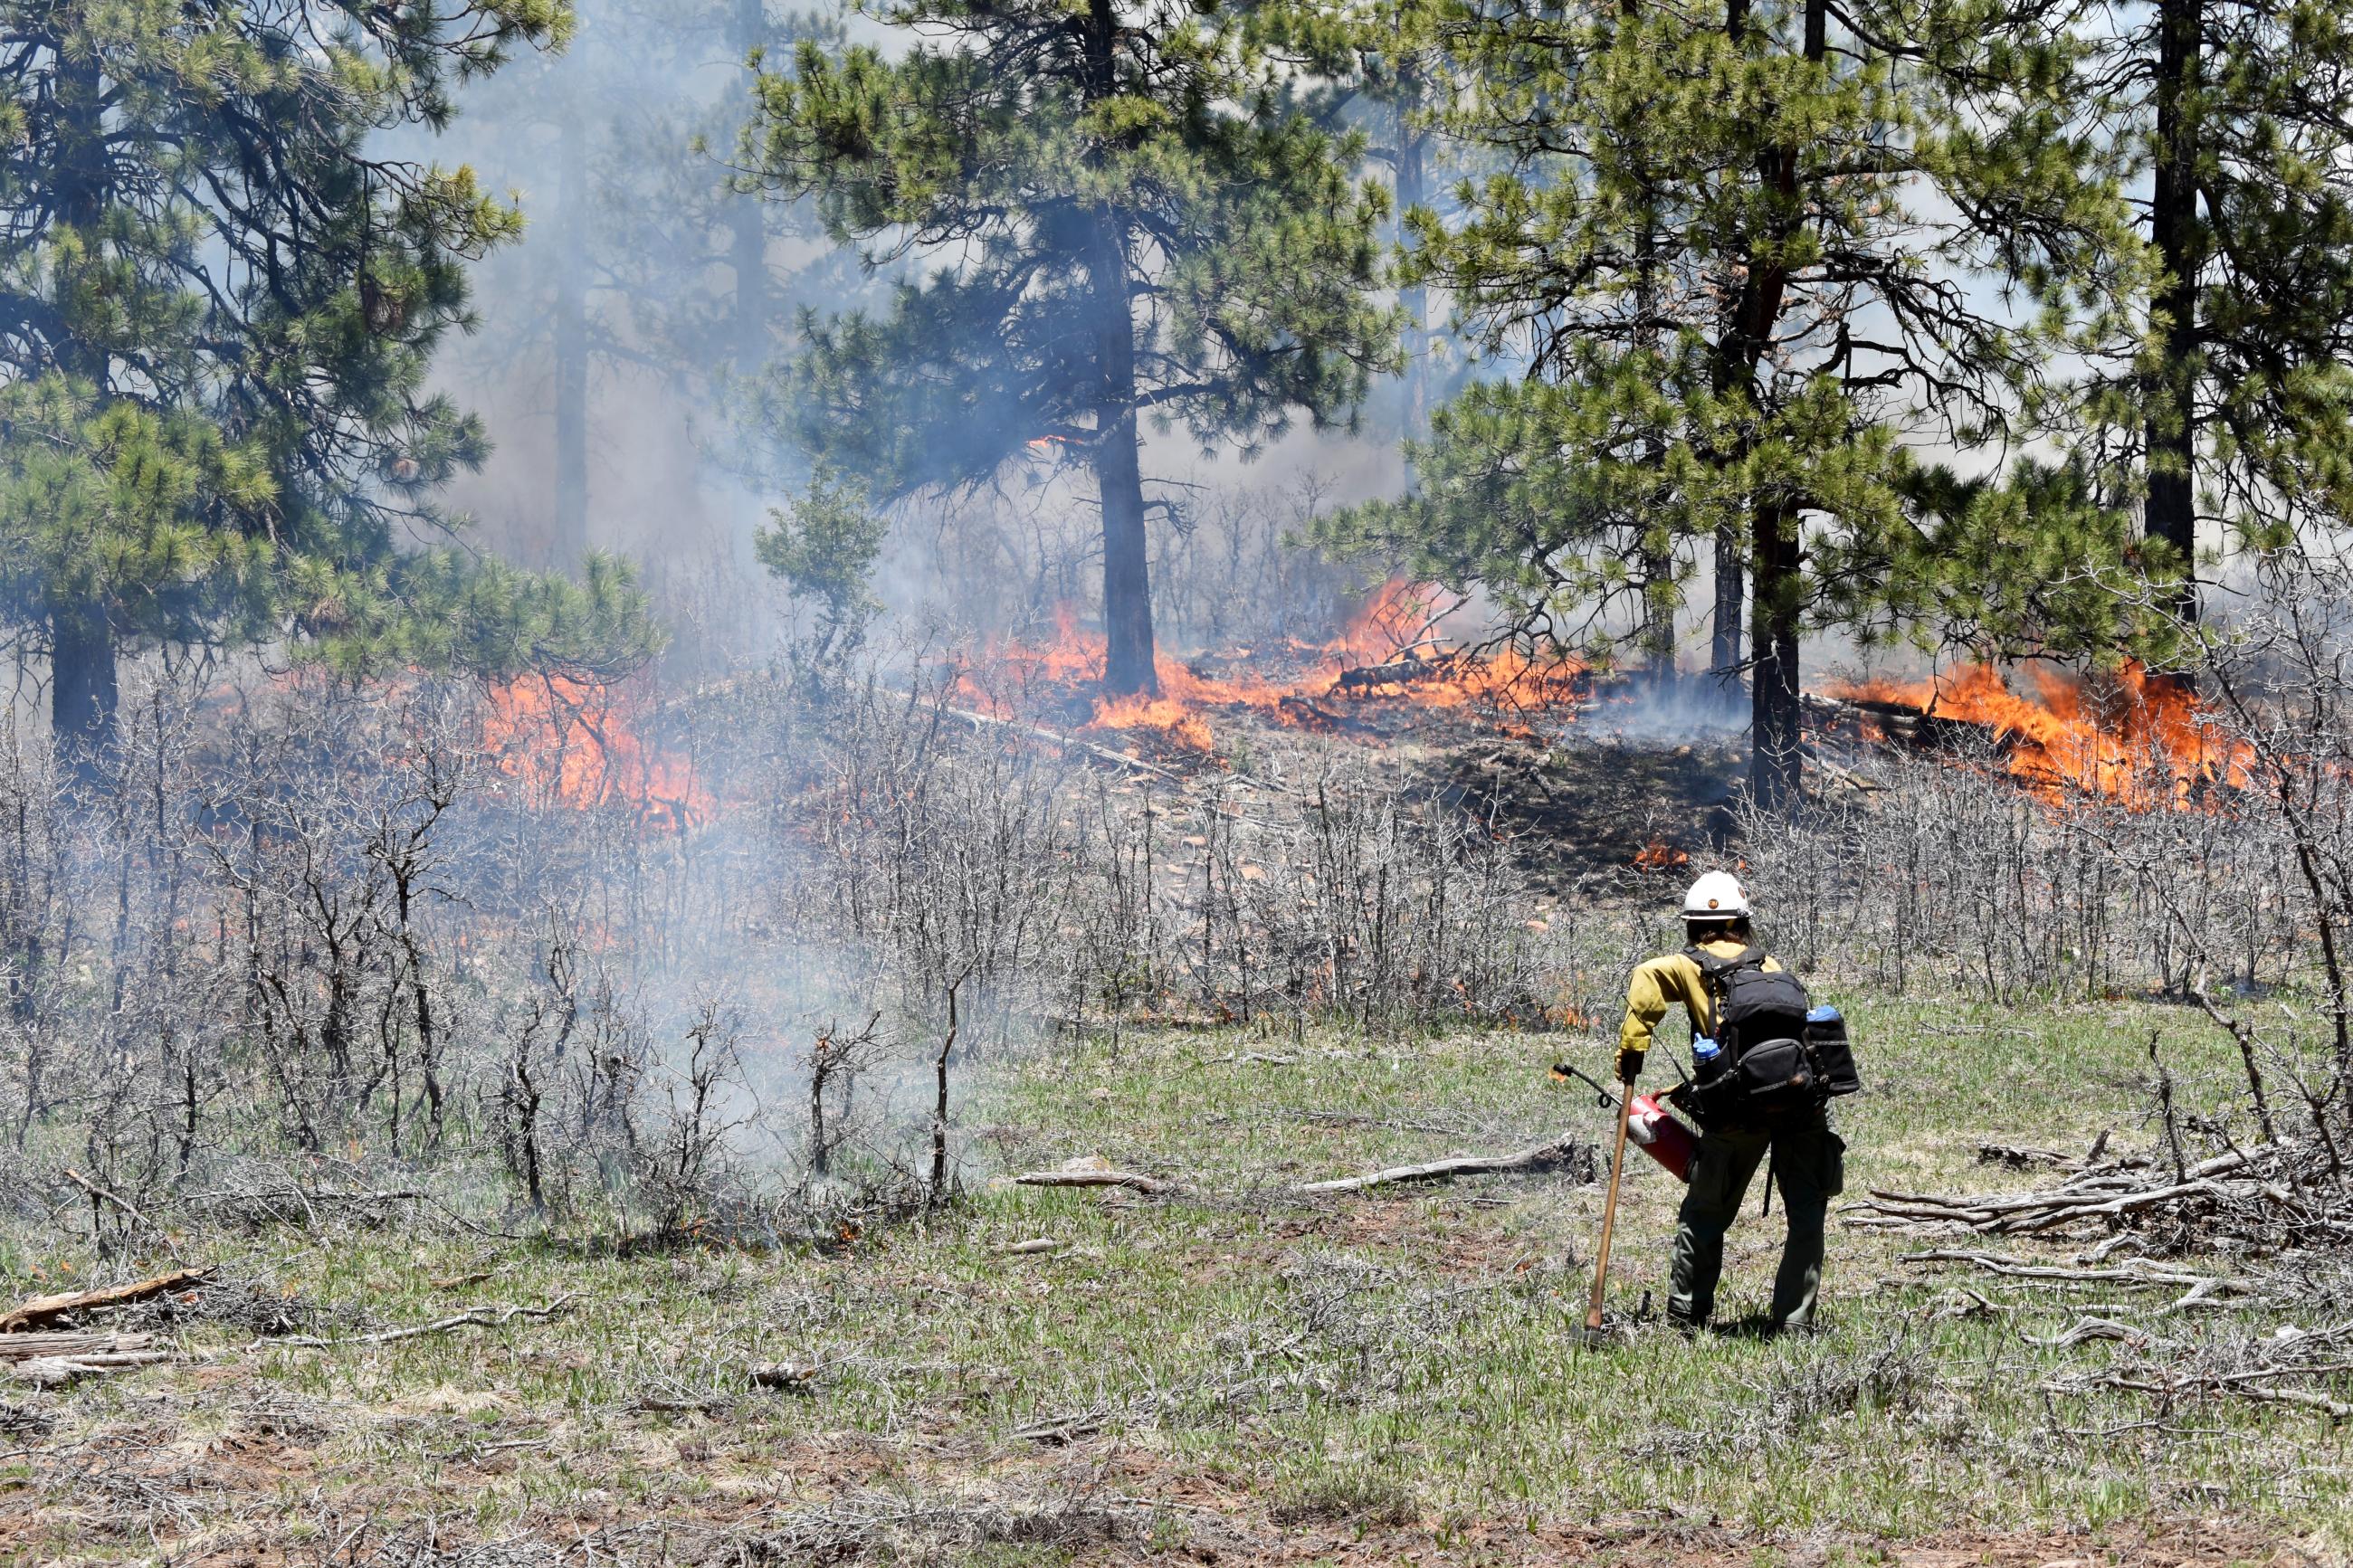 Firefighter standing in the foreground with his back to the camera. There are ponderosa pines in the background, surrounded by smoke. There are short flames in the brush under the flames. 